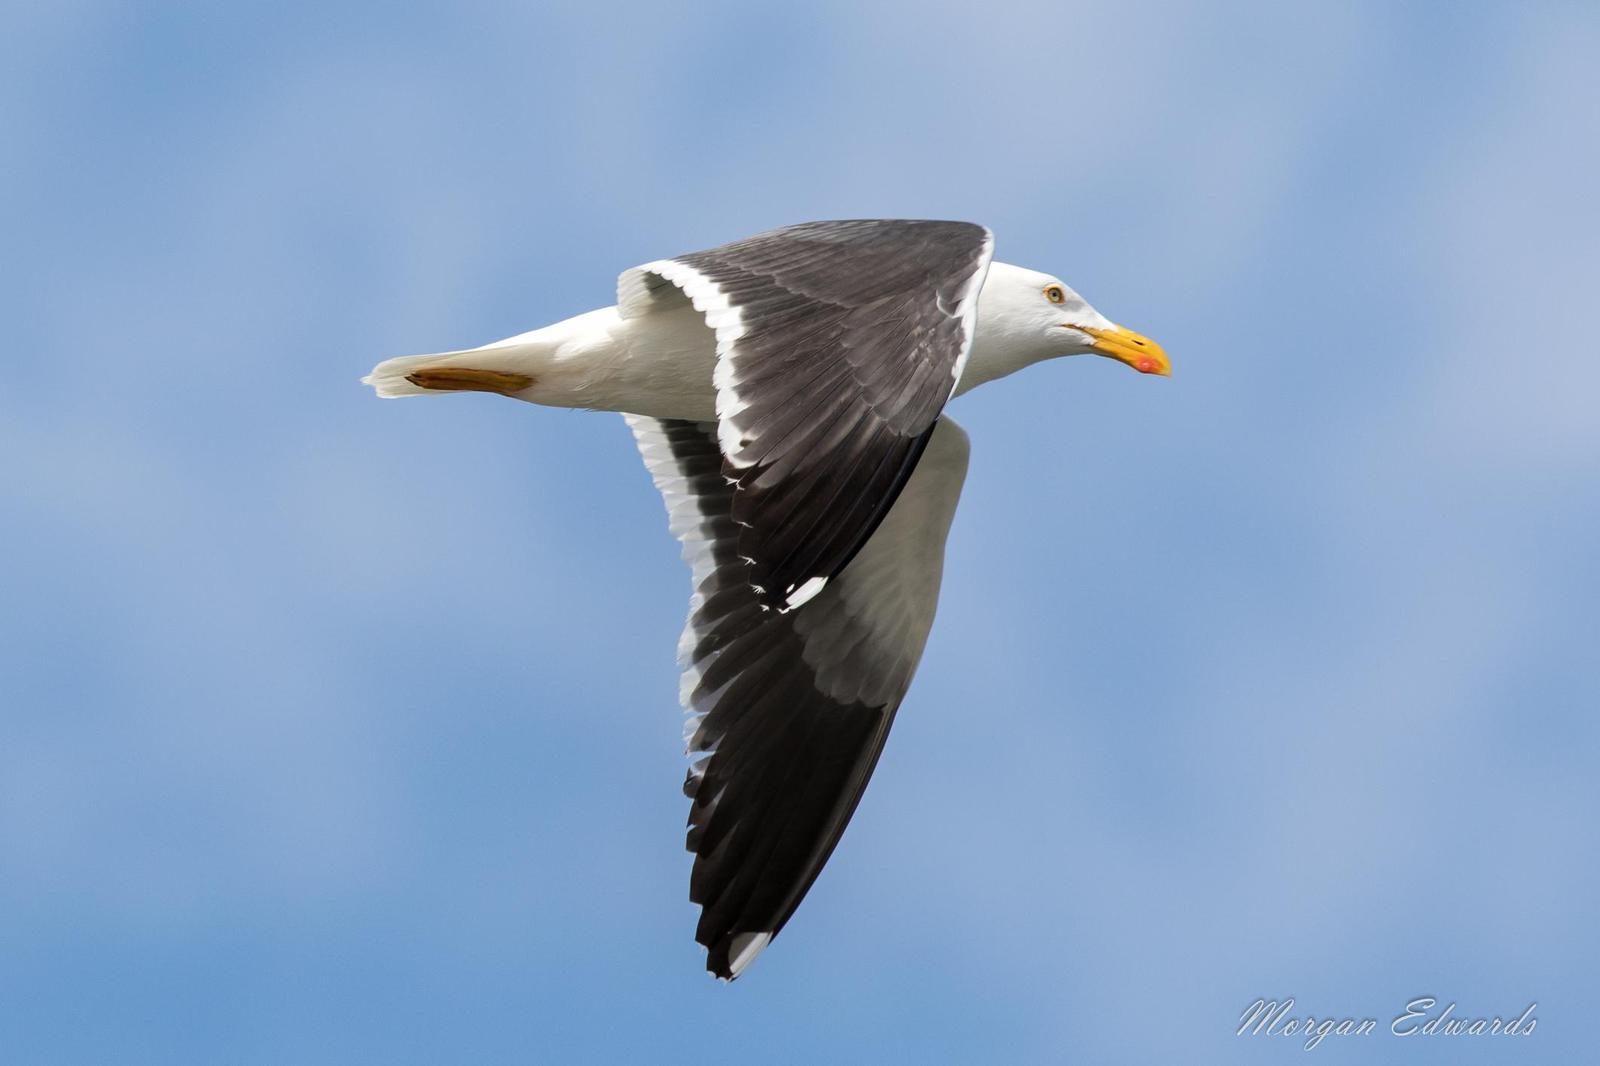 Yellow-footed Gull Photo by Morgan Edwards